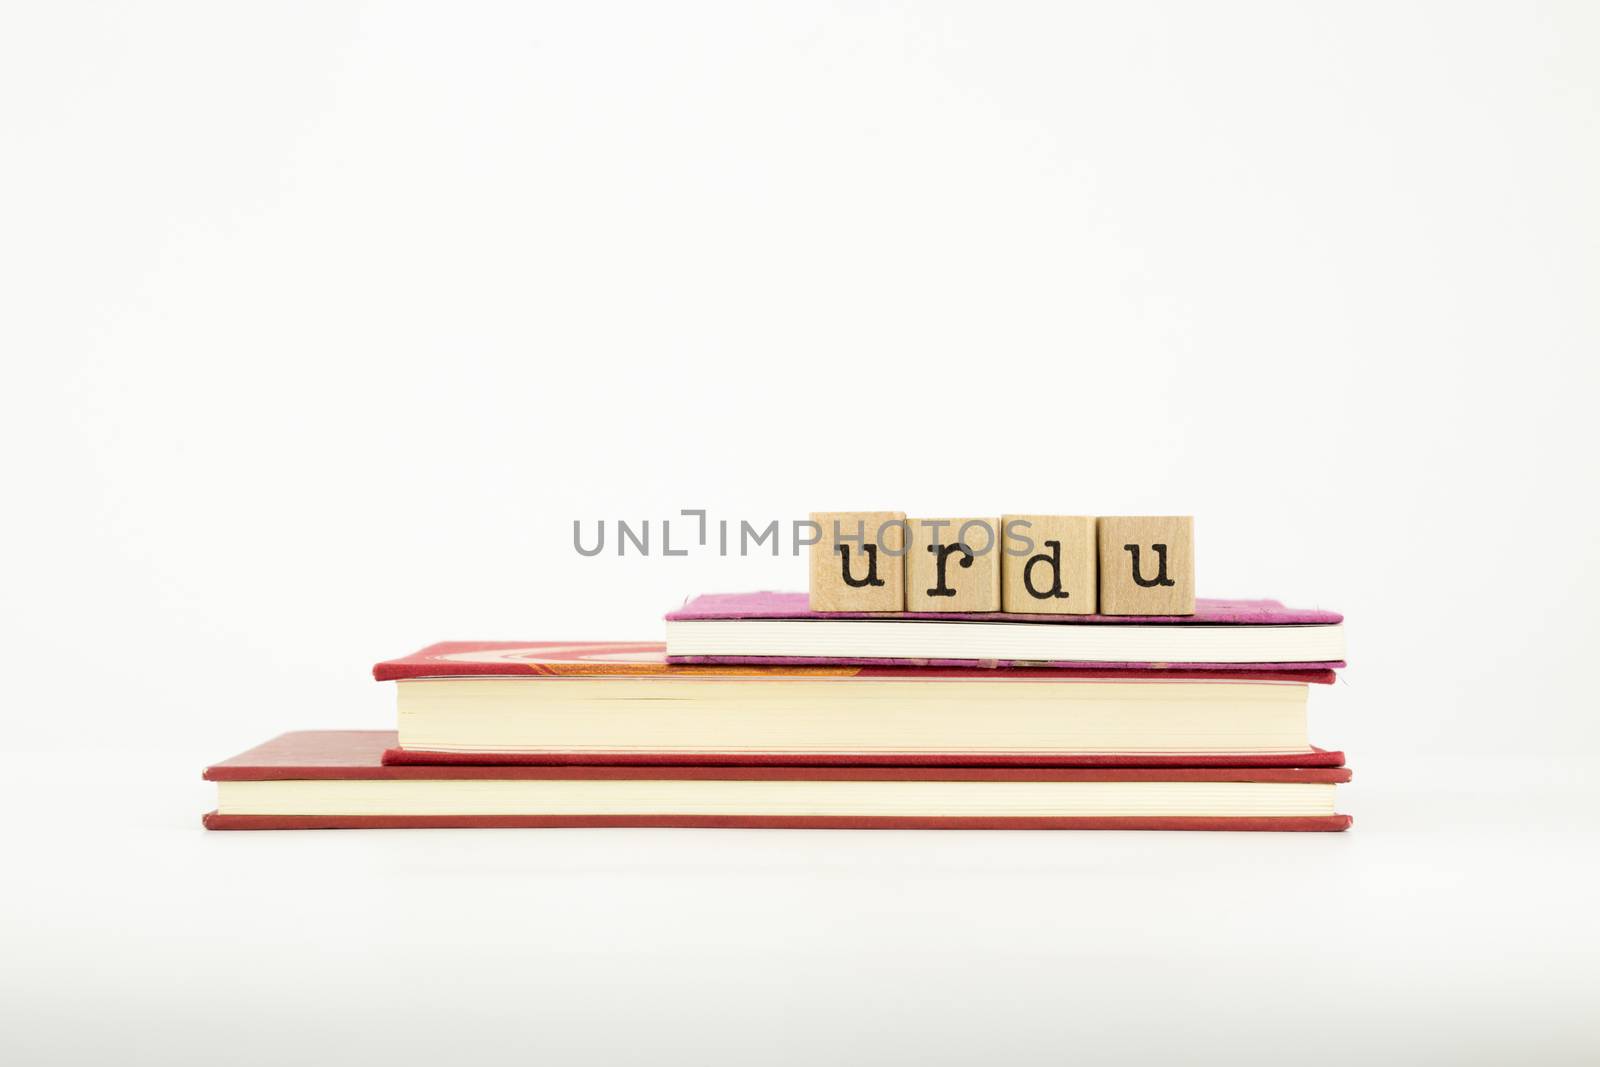 urdu word on wood stamps stack on books, language and study concept